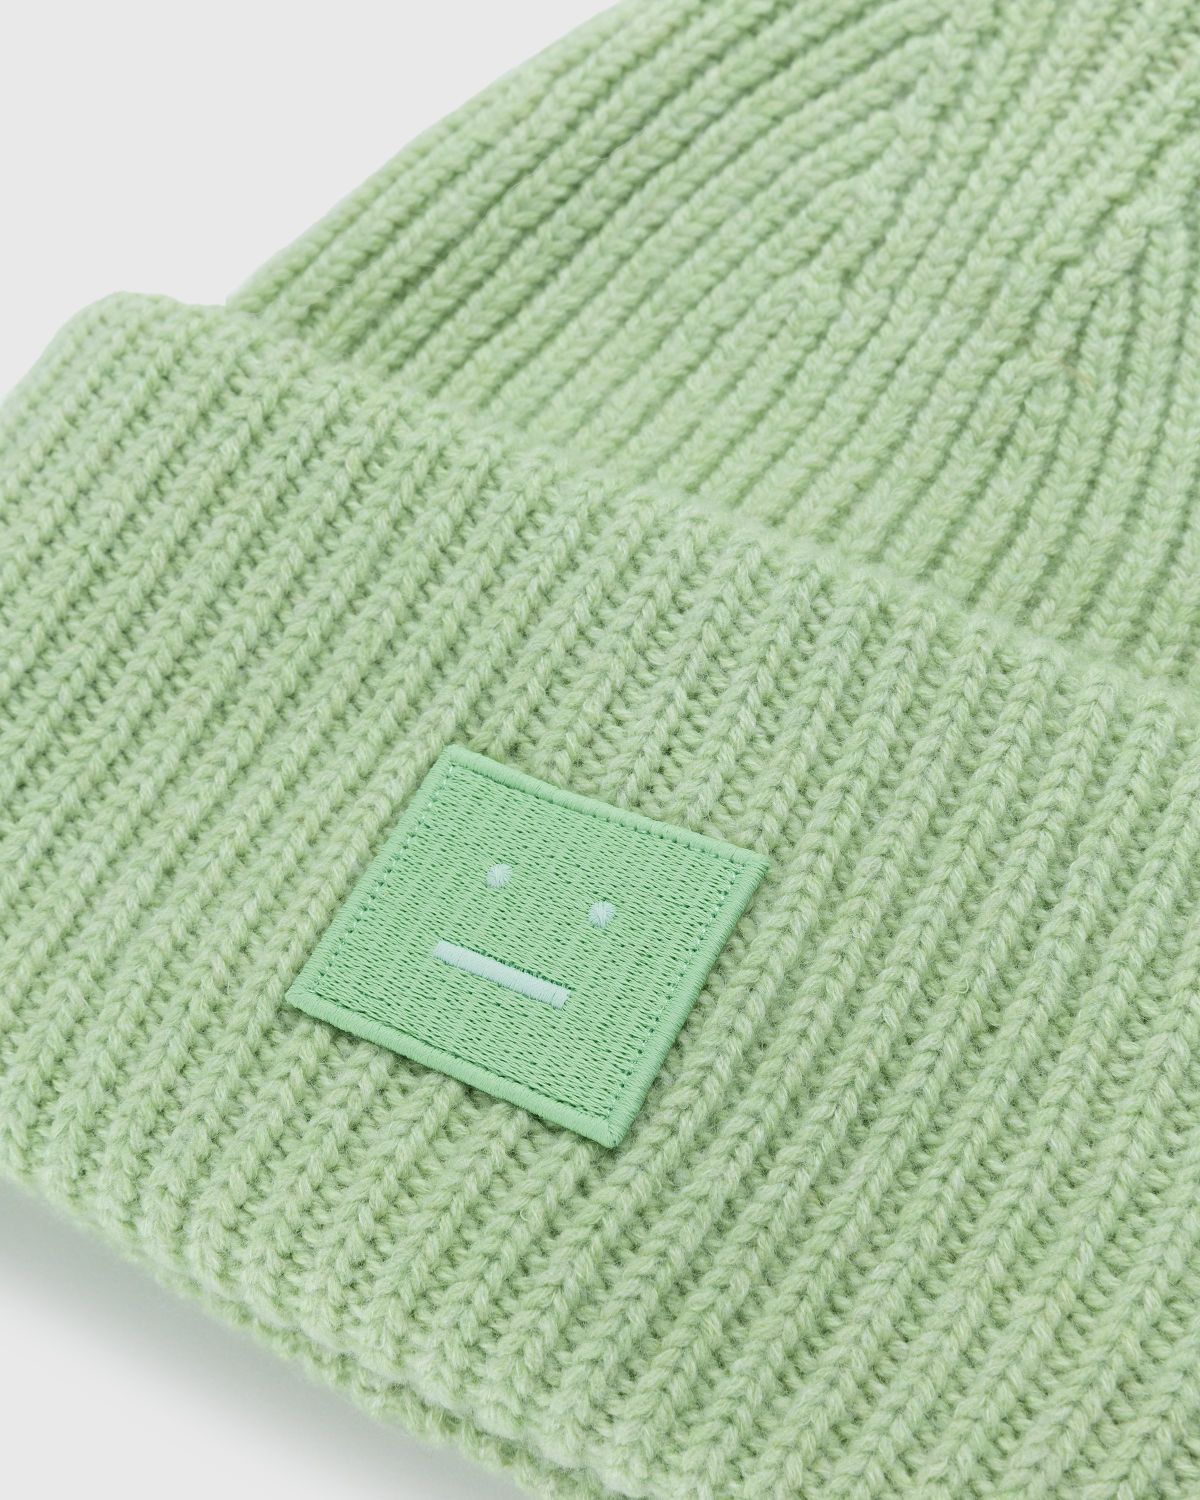 Acne Studios – Knit Face Patch Beanie Pale Green - Beanies - Green - Image 3